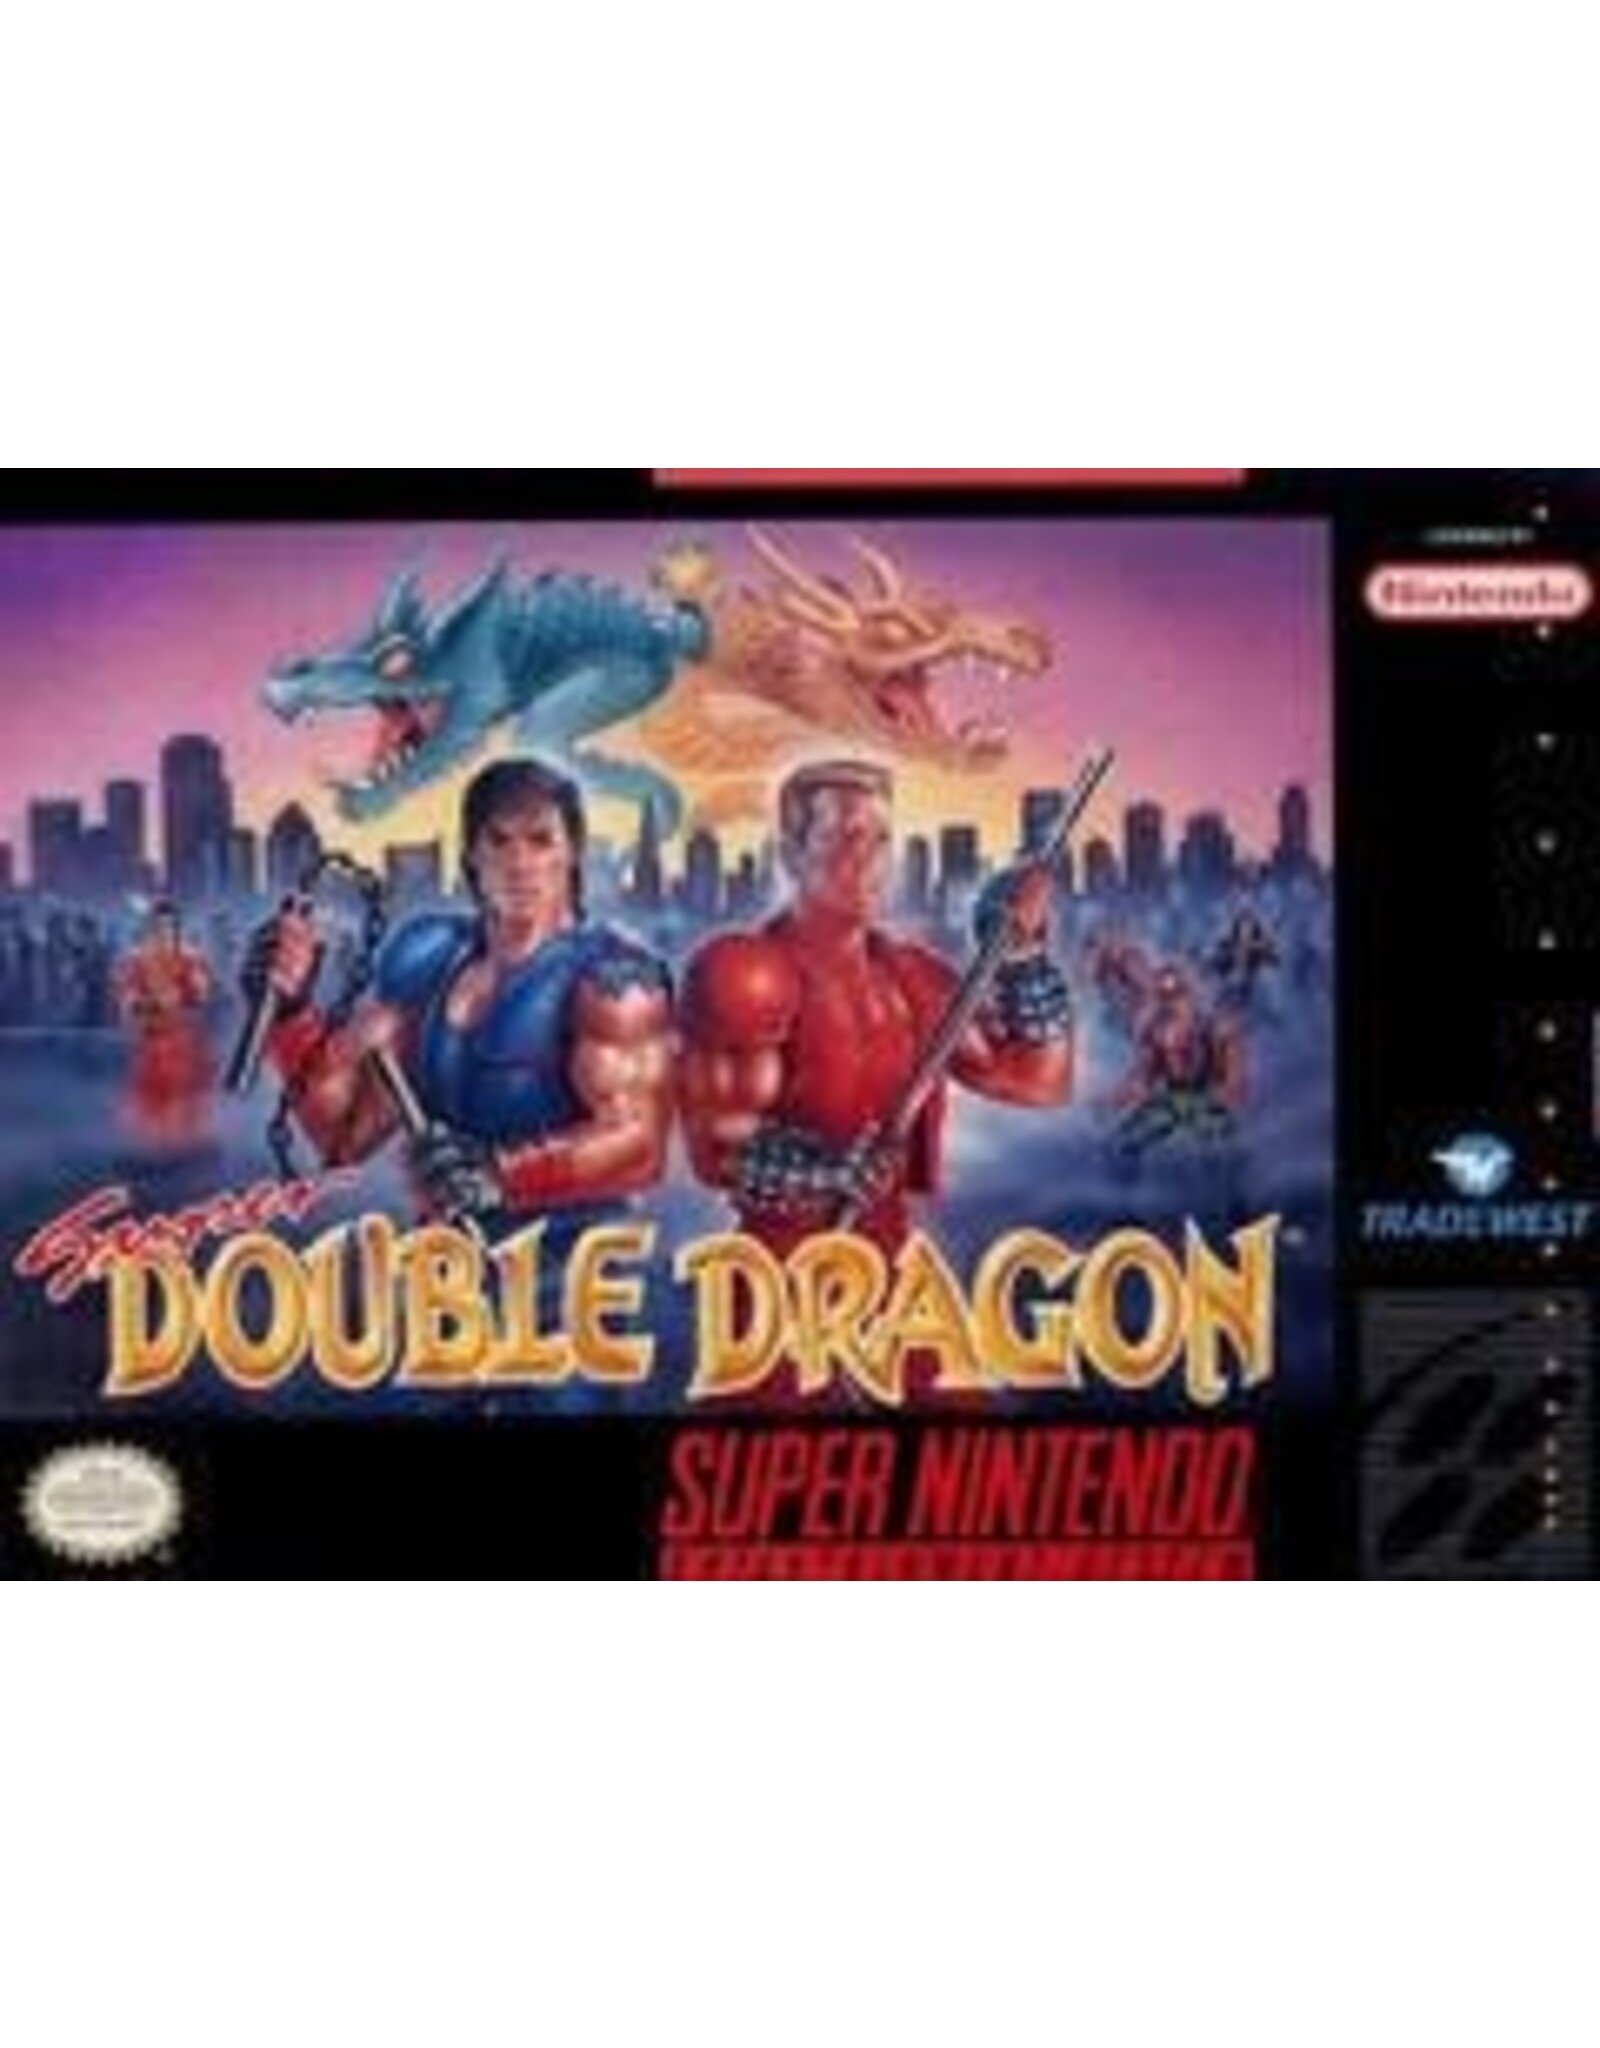 Super Nintendo Super Double Dragon (Used, Cart Only, Cosmetic Damage)